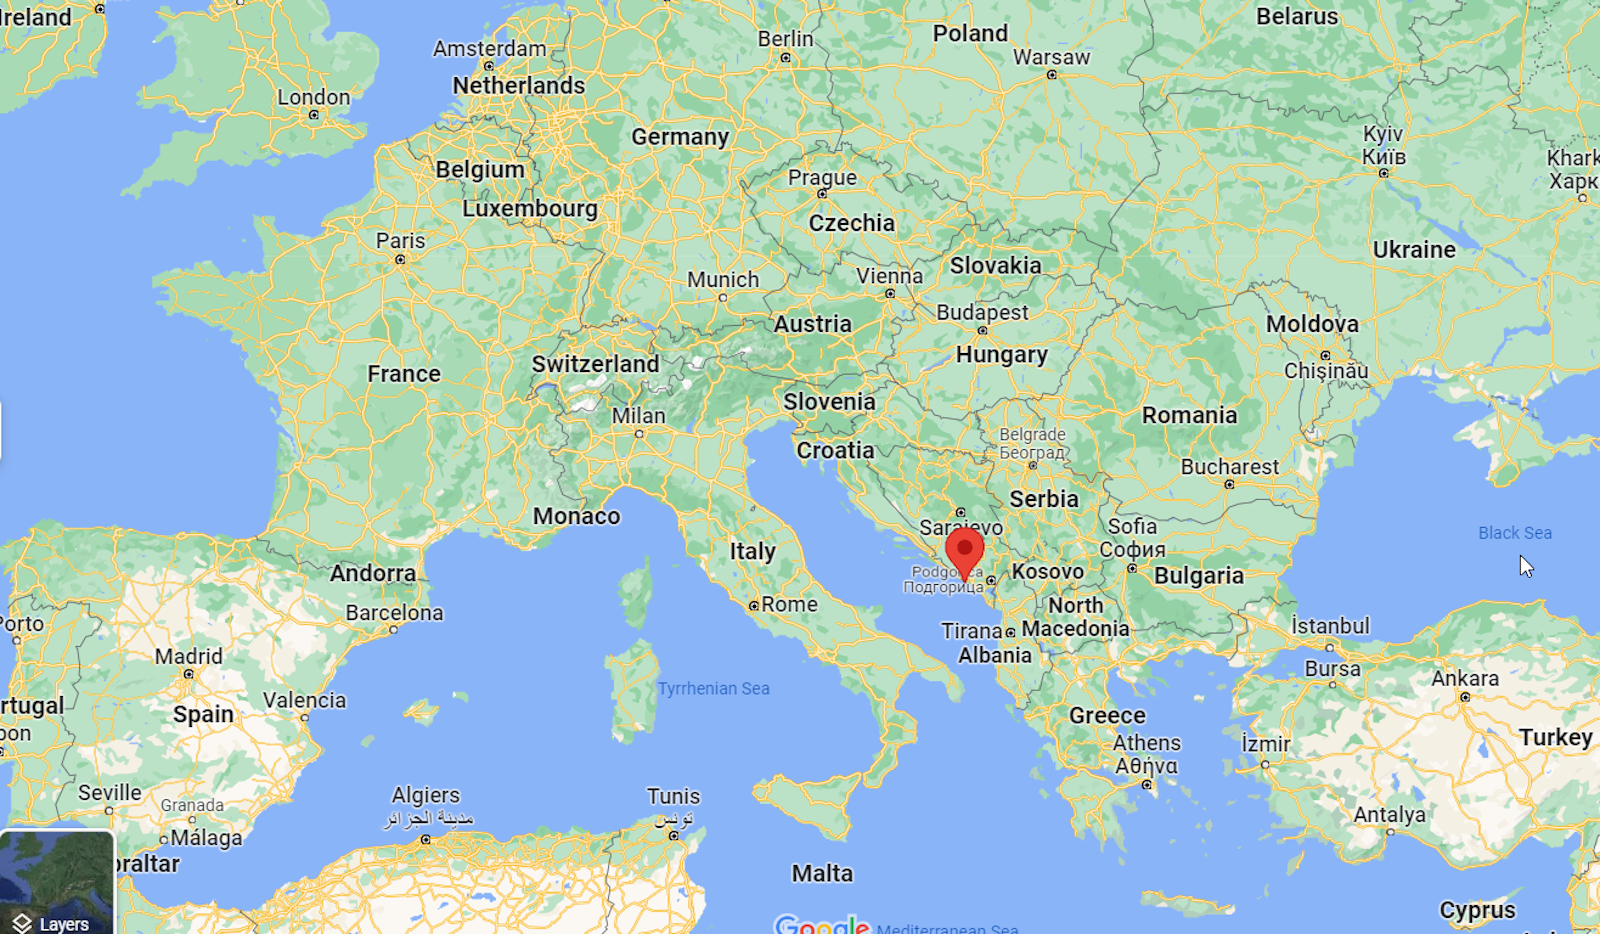 The current city of Herceg Novi is on the eastern shore of the Adriatic Sea in the southern European country of Montenegro. It once was the seat of a Catholic diocese, but many of the details have been lost to history. (Google Maps)